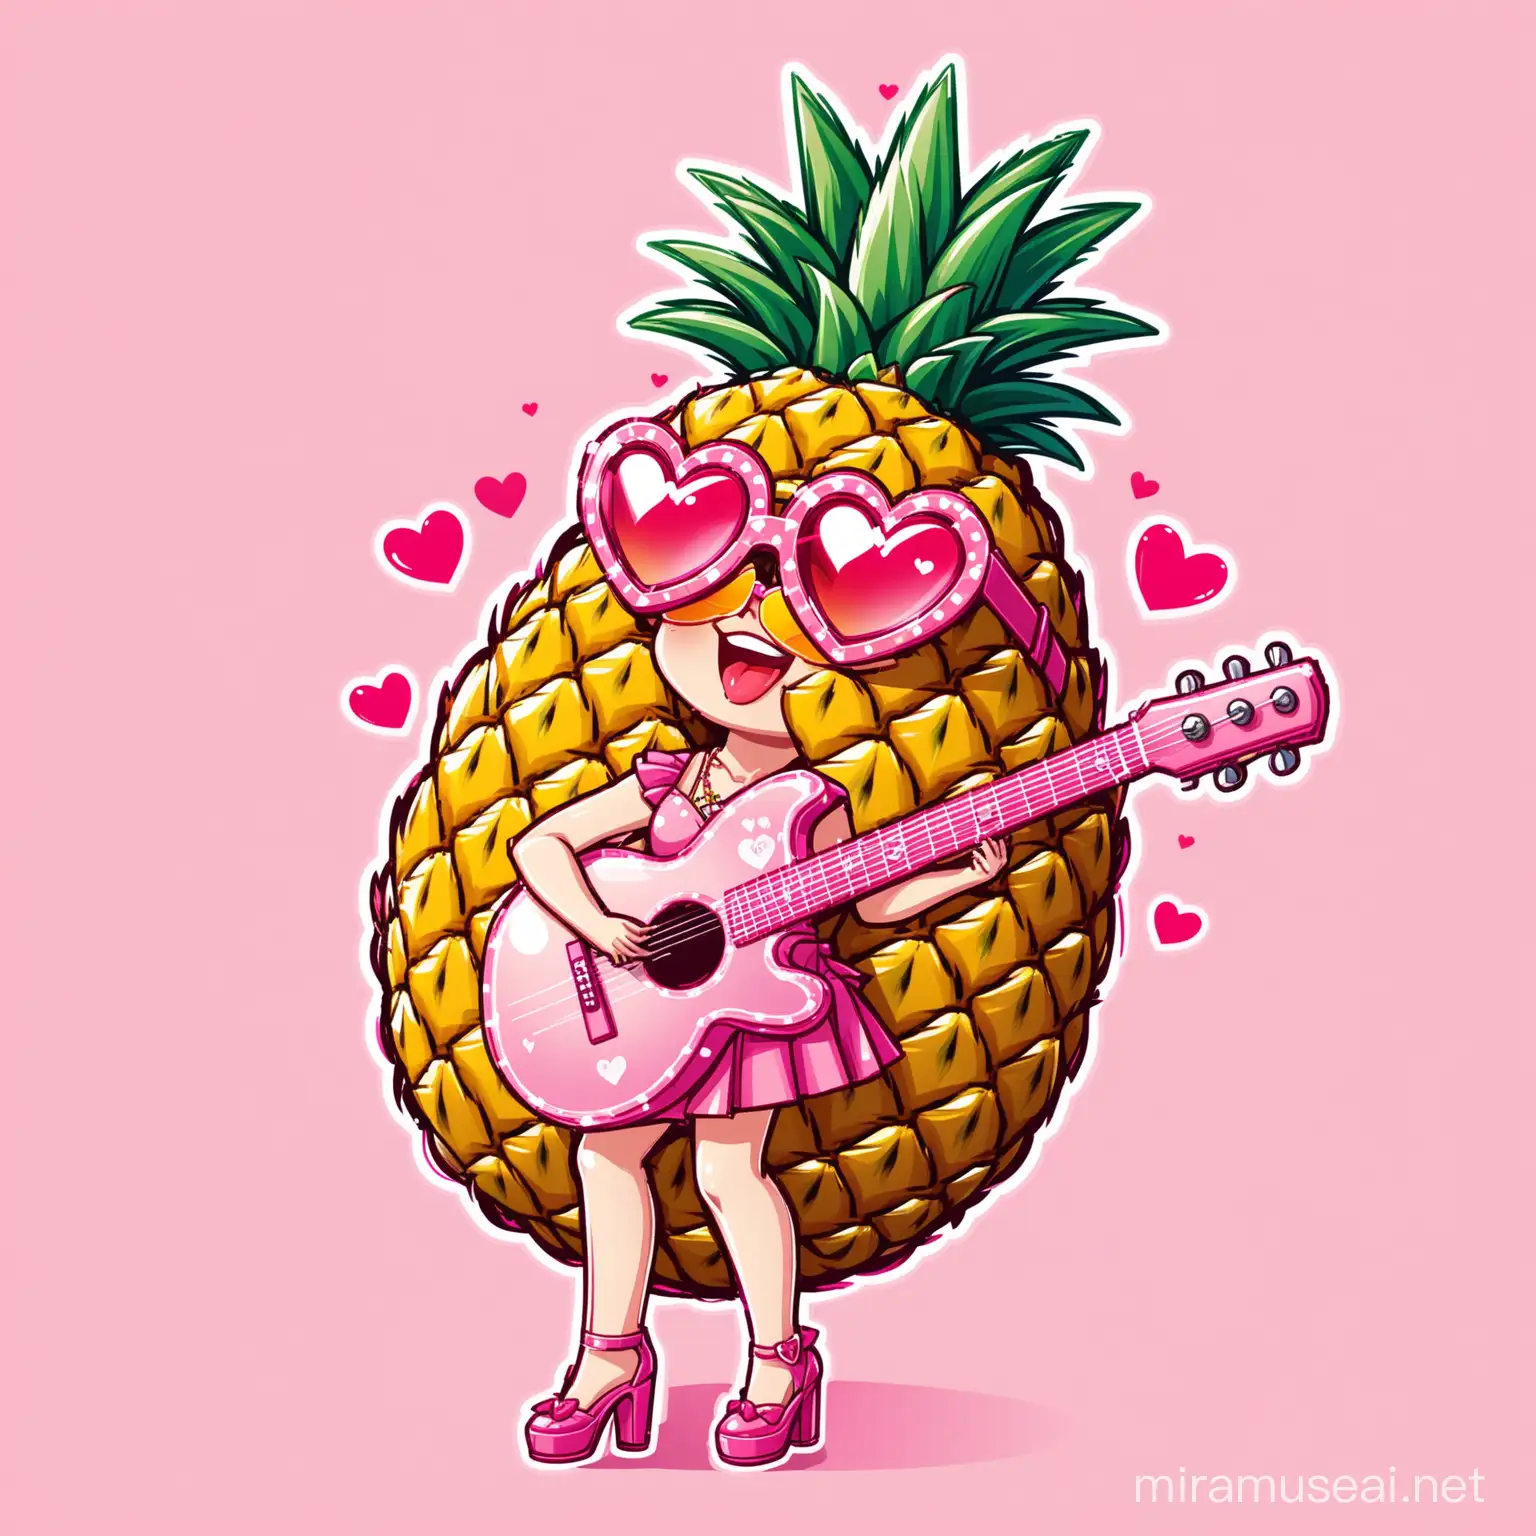 Playful Pineapple Logo with Heart Glasses and Pink Fashion